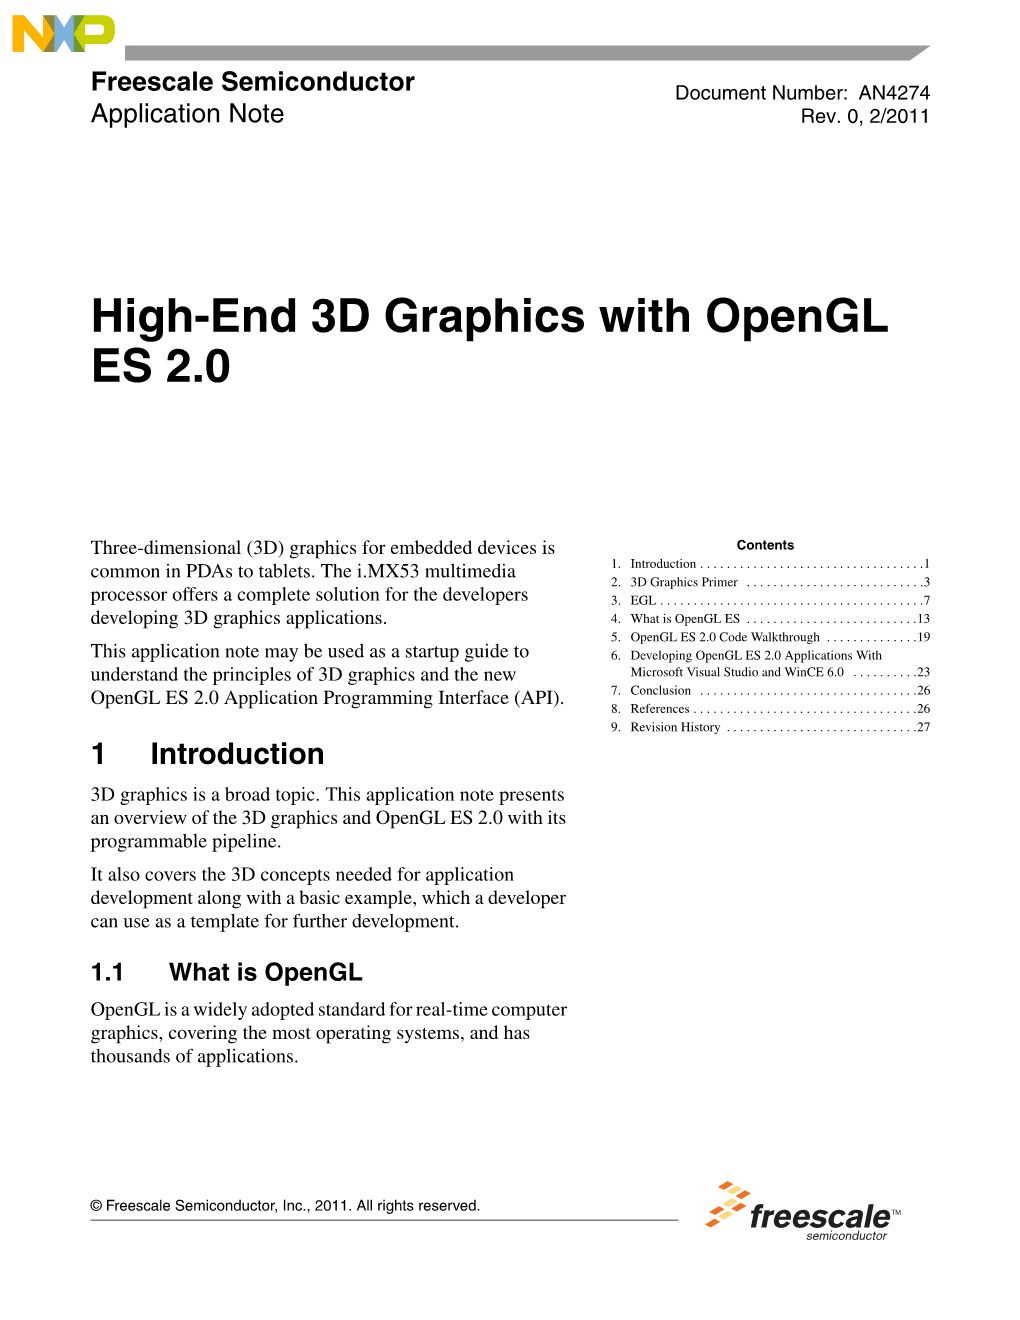 High-End 3D Graphics with Opengl ES 2.0